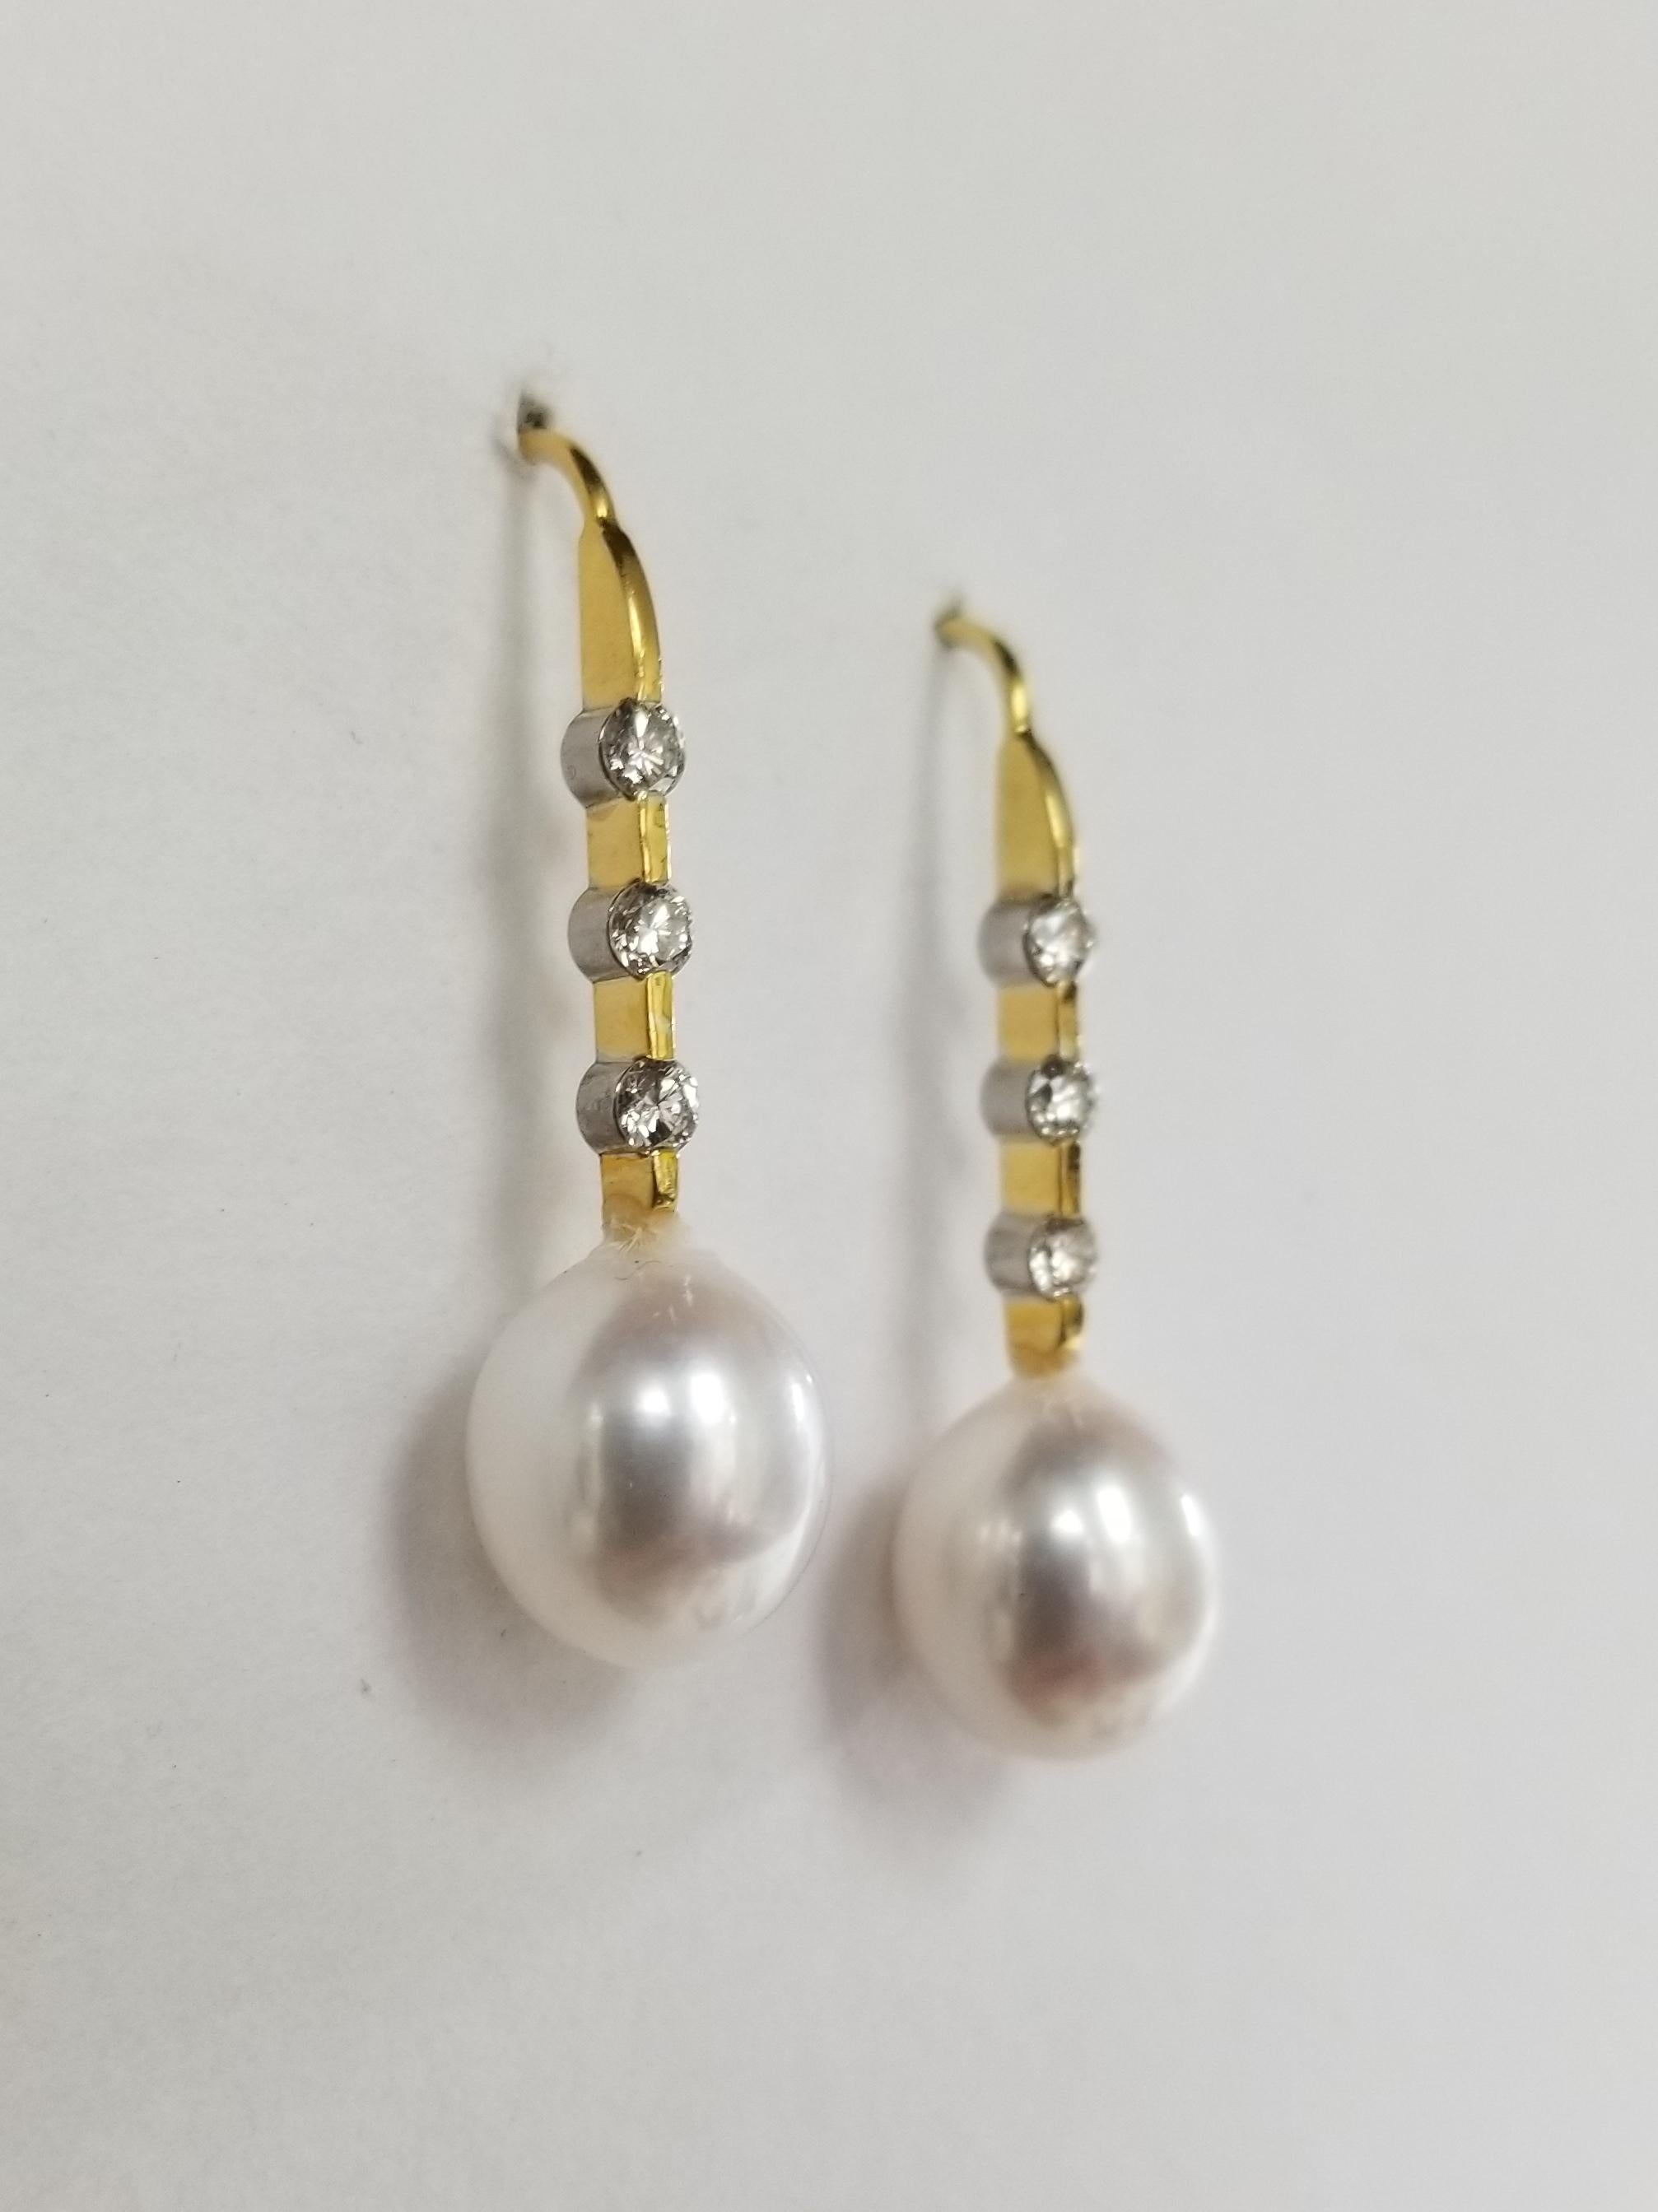 14k yellow gold large pearl and diamond drop earrings, containing 2 fresh water pearls 10mm x 12mm with round full cut bezel set diamonds weighing .36pt.s